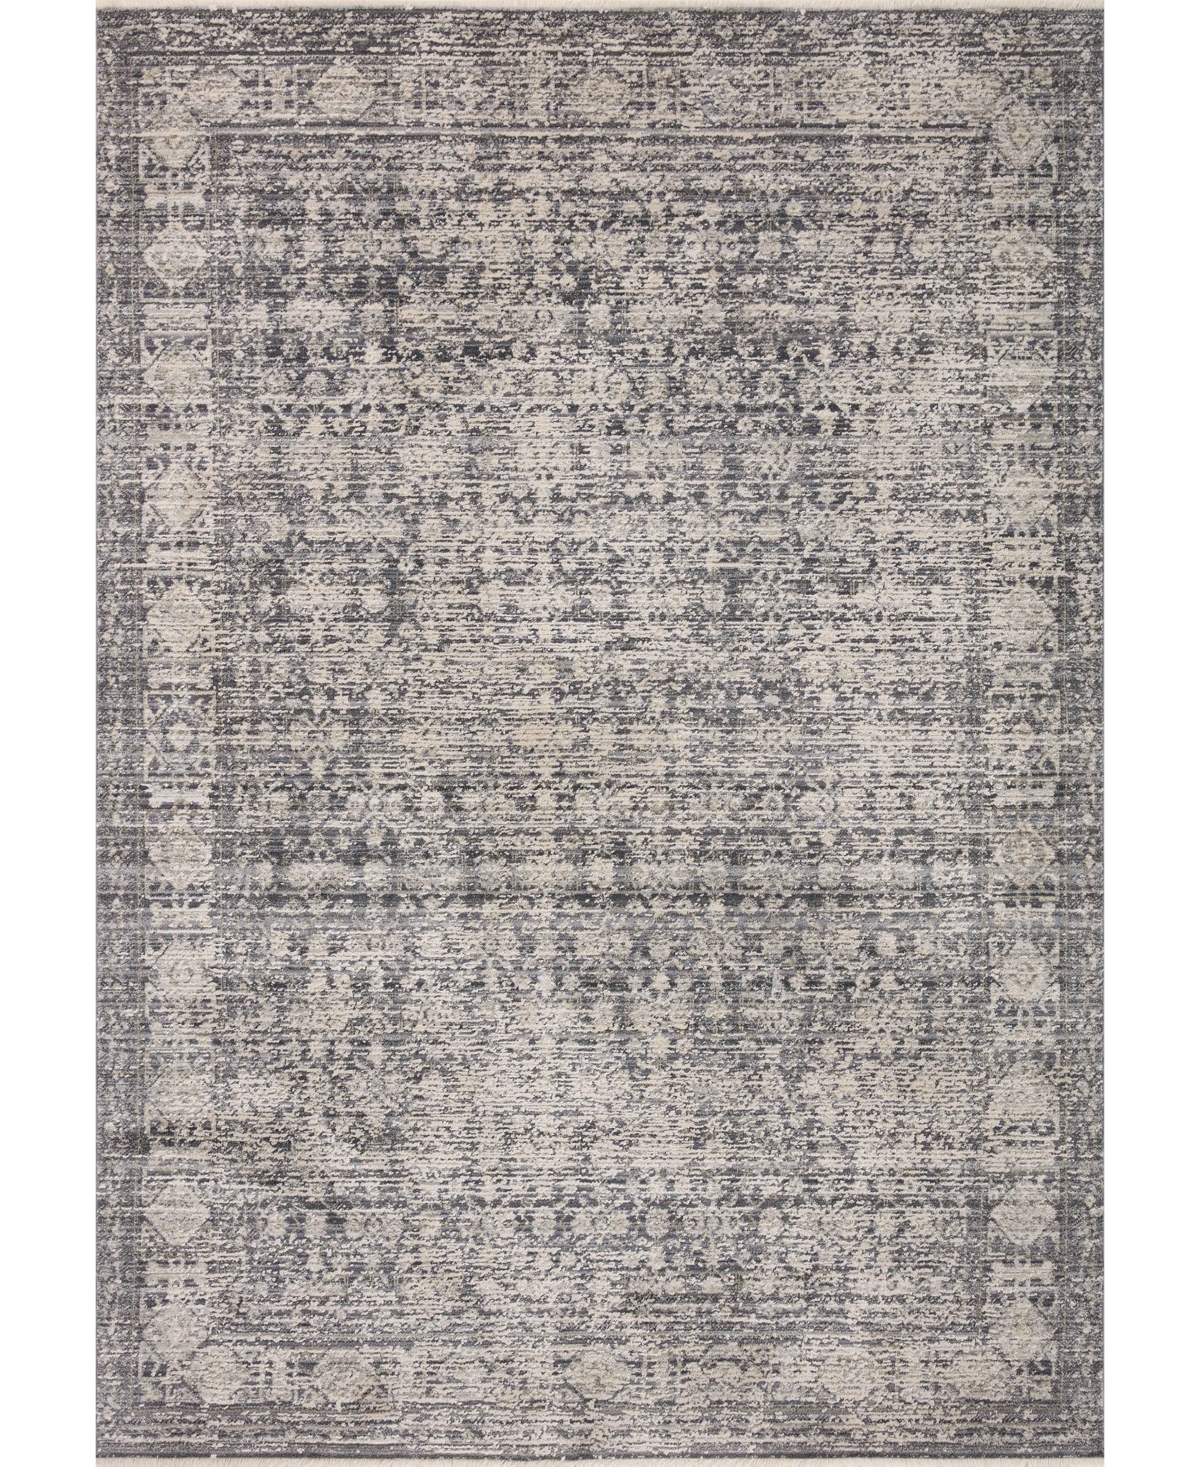 Amber Lewis X Loloi Alie Ale-03 5'3" X 7'9" Area Rug In Charcoal